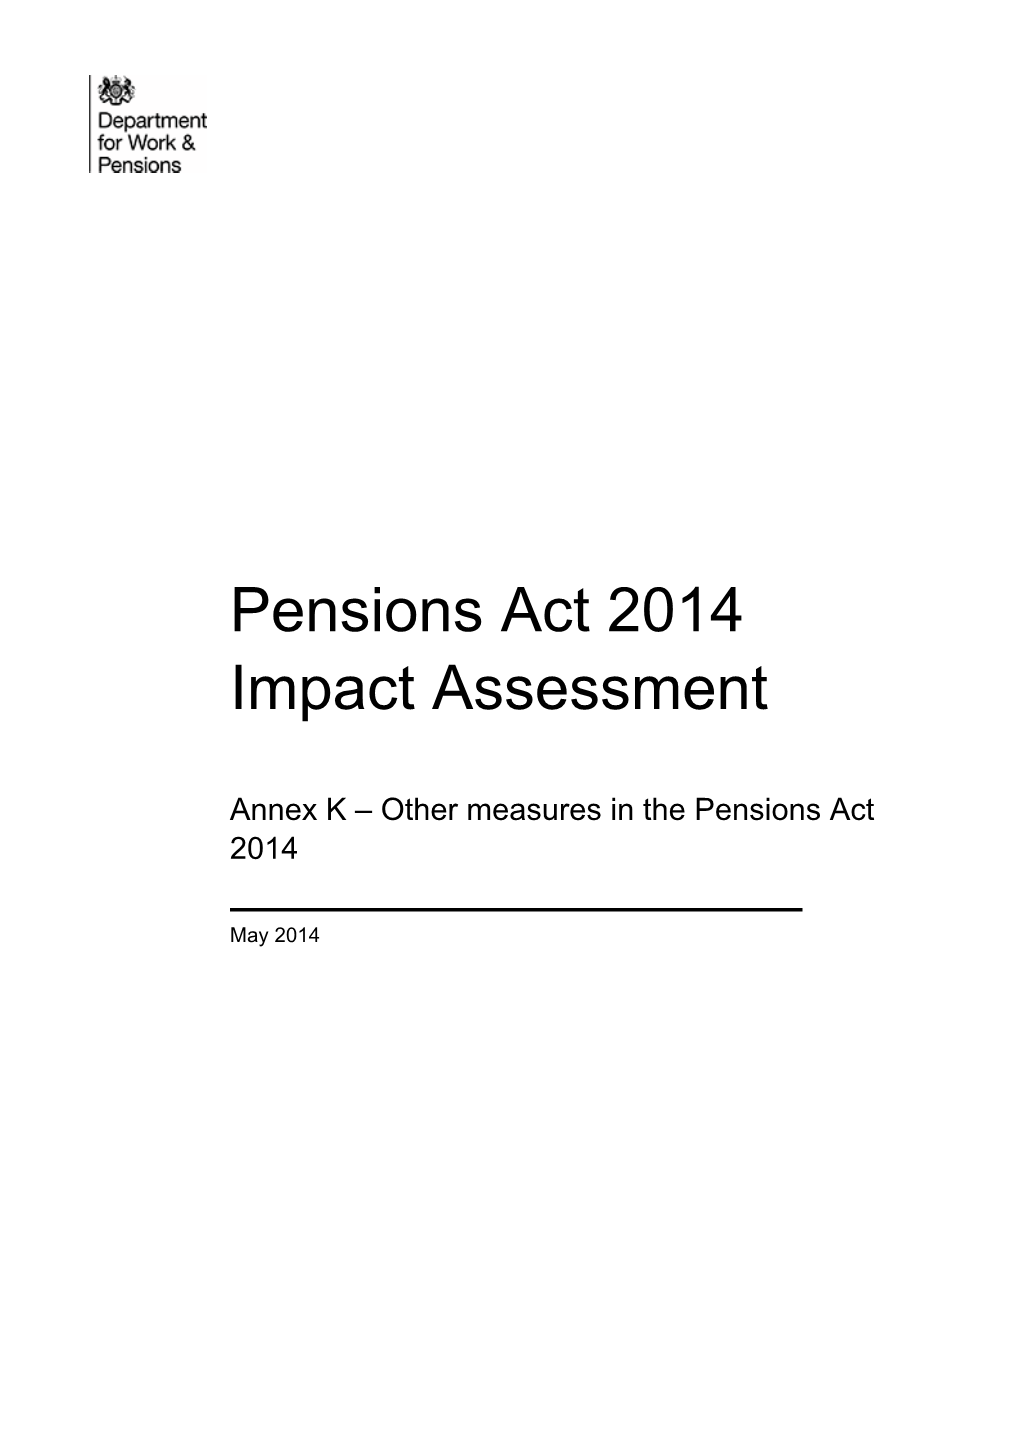 Annex K – Other Measures in the Pensions Act 2014